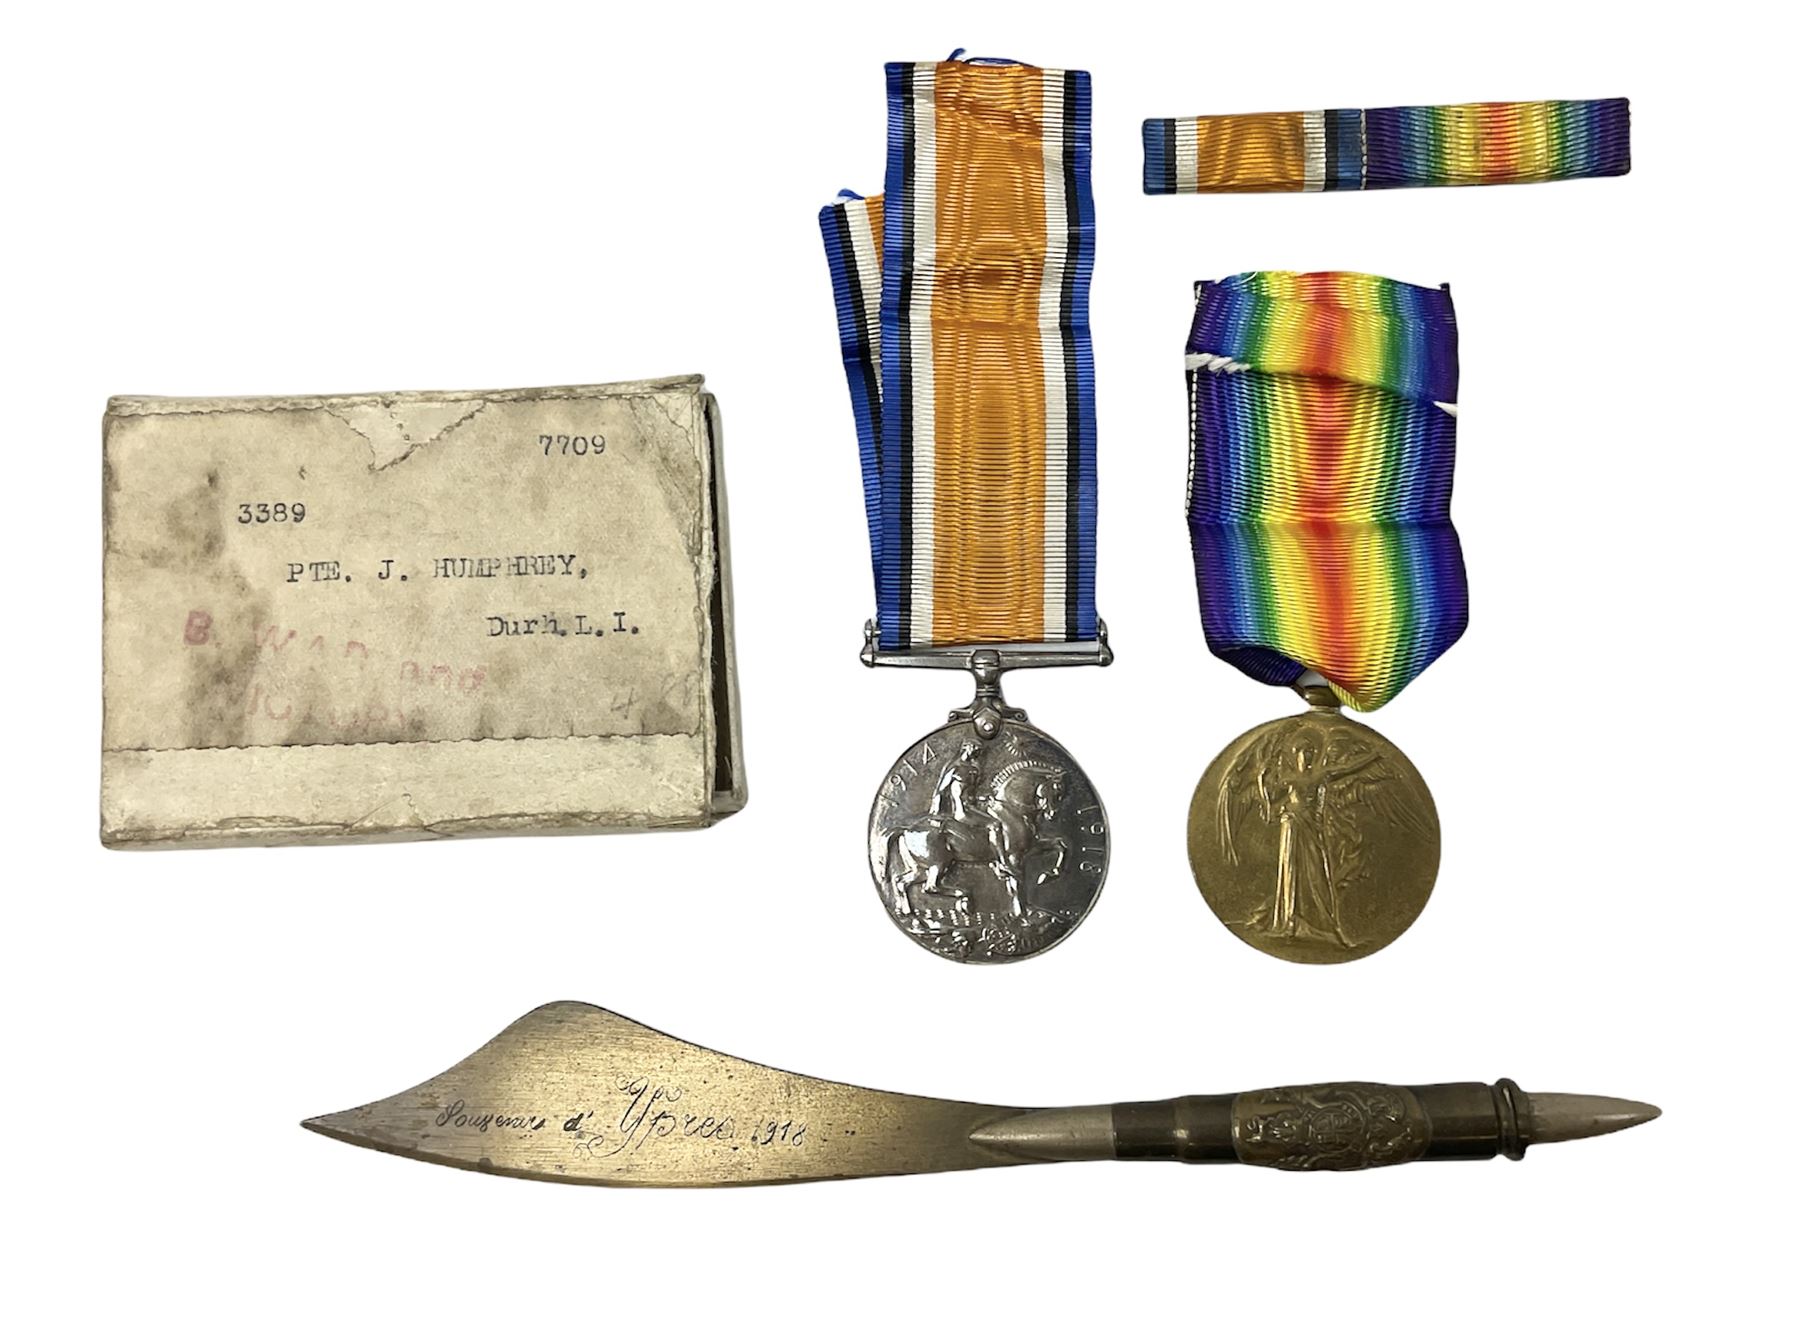 WW1 pair of medals comprising British War Medal and Victory Medal awarded to 3389 Pte. J. Humphrey D